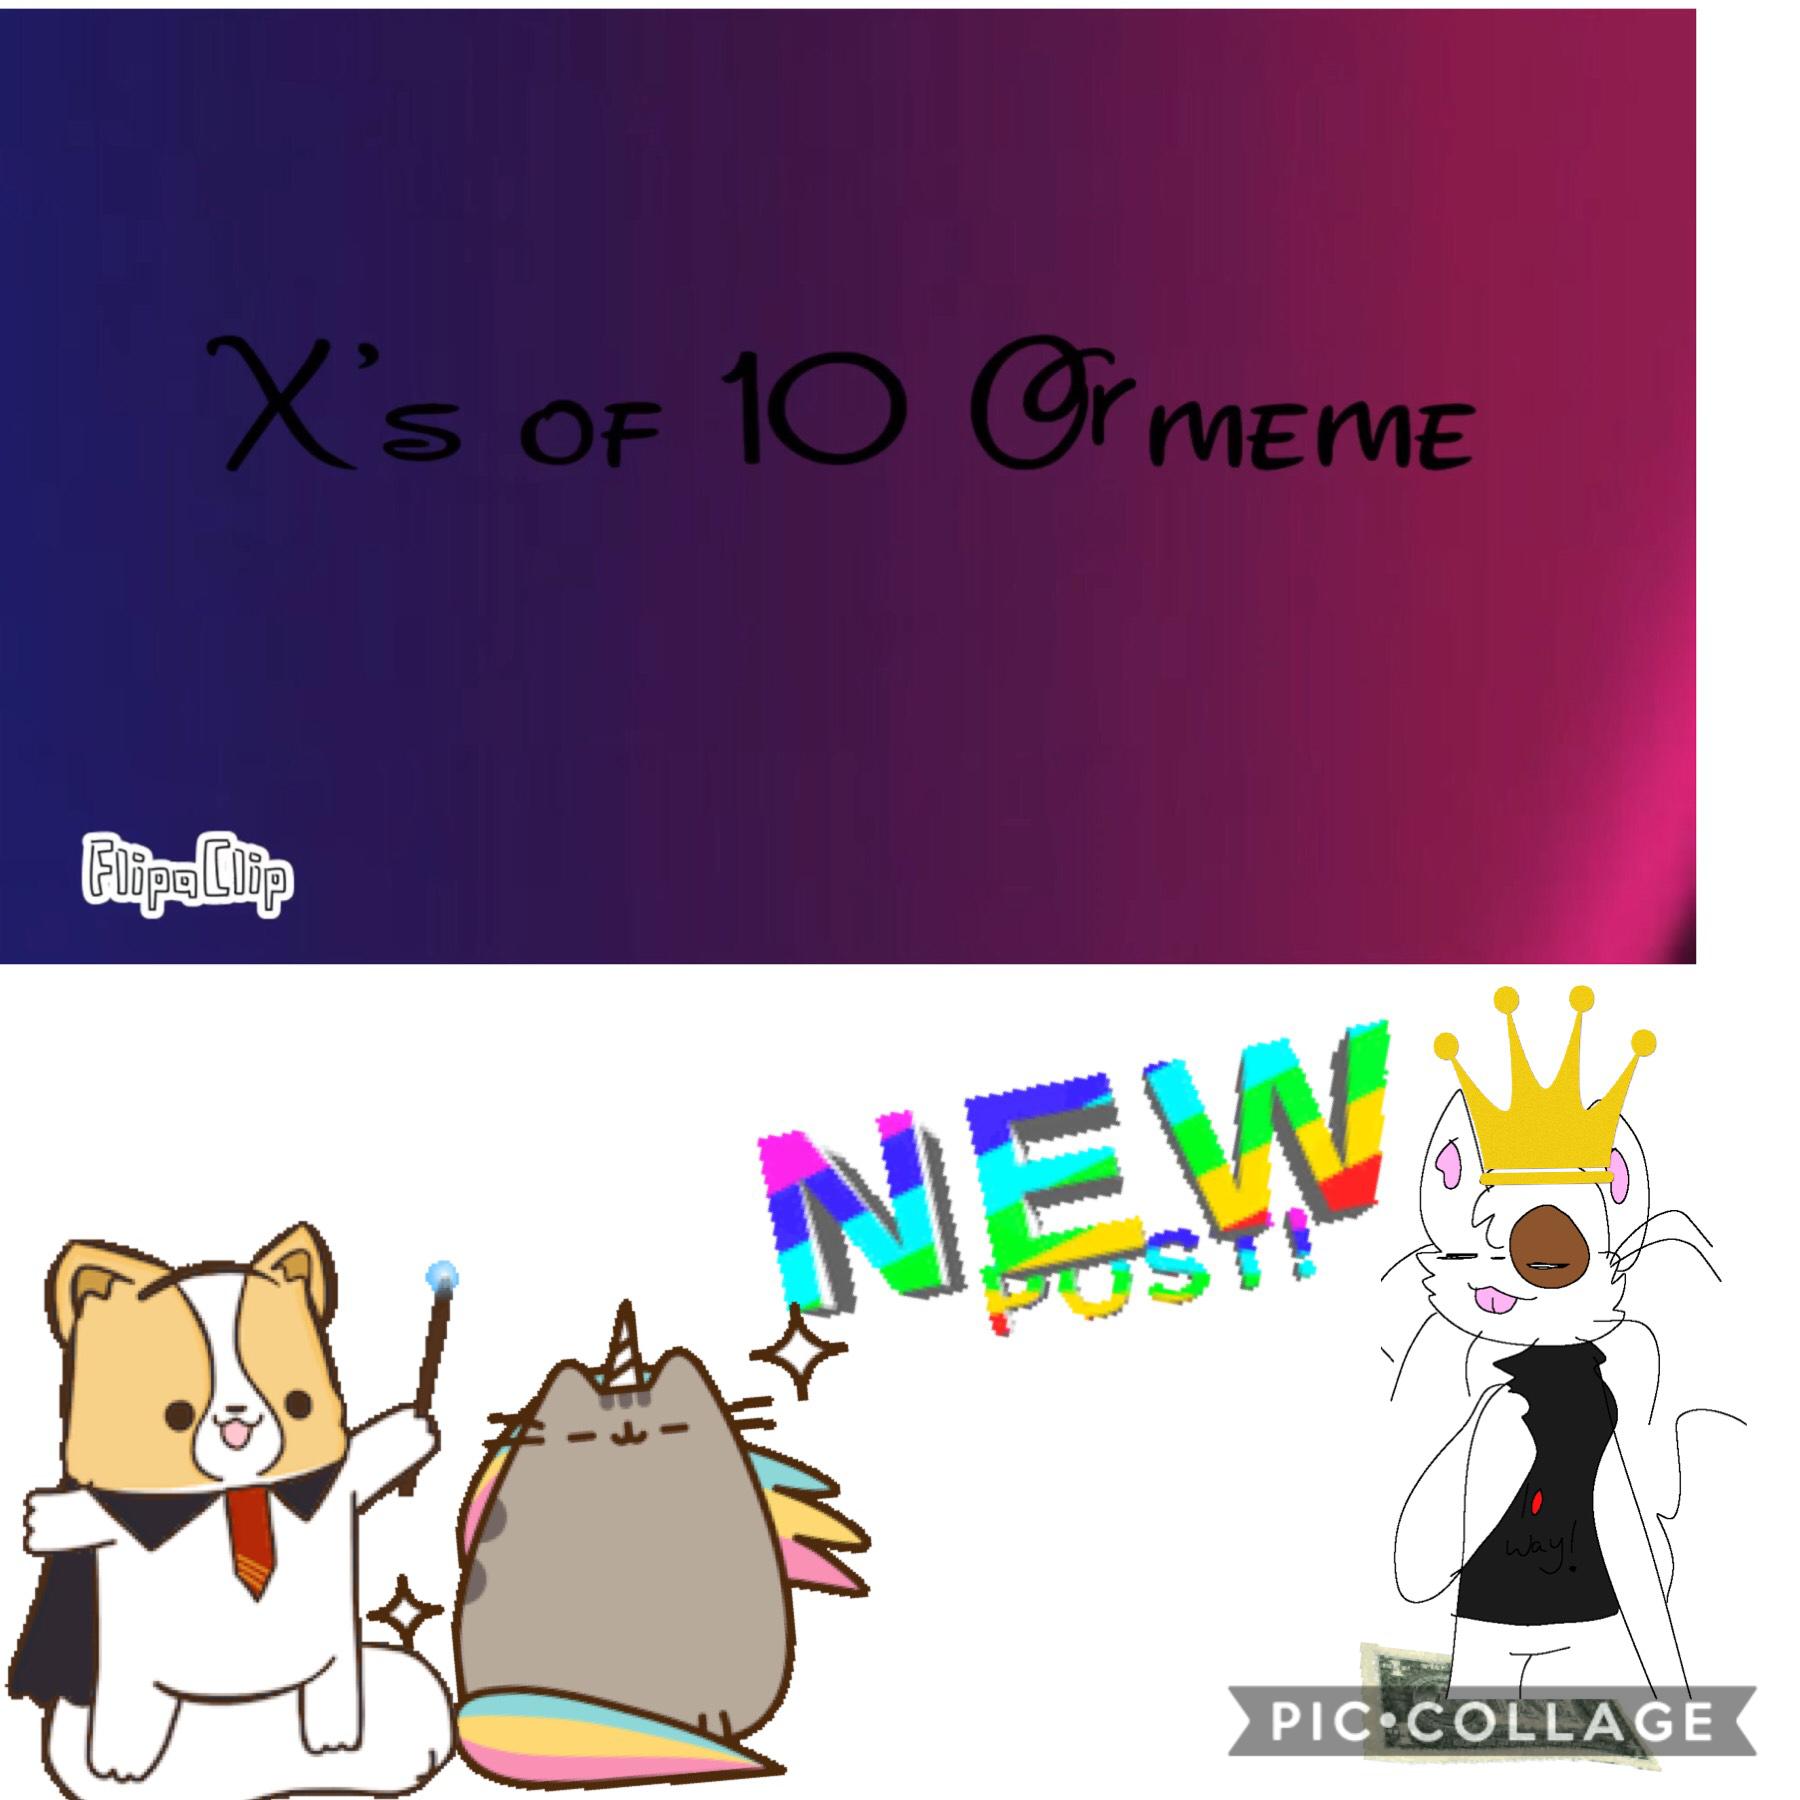 X's of 10